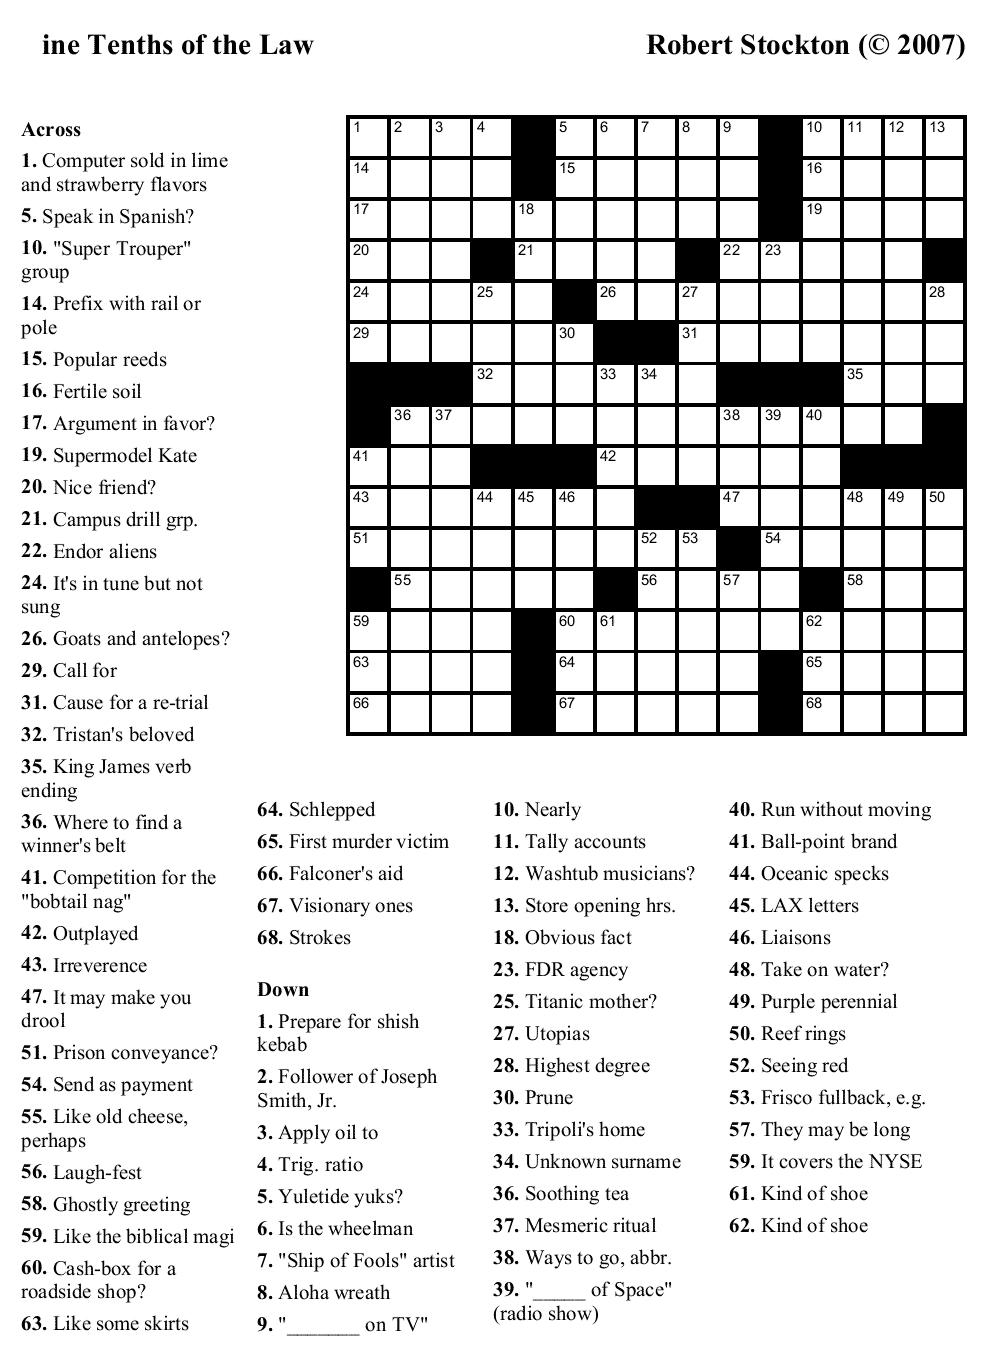 Crossword Puzzles Printable - Yahoo Image Search Results | Crossword - Printable Crossword Puzzle Games